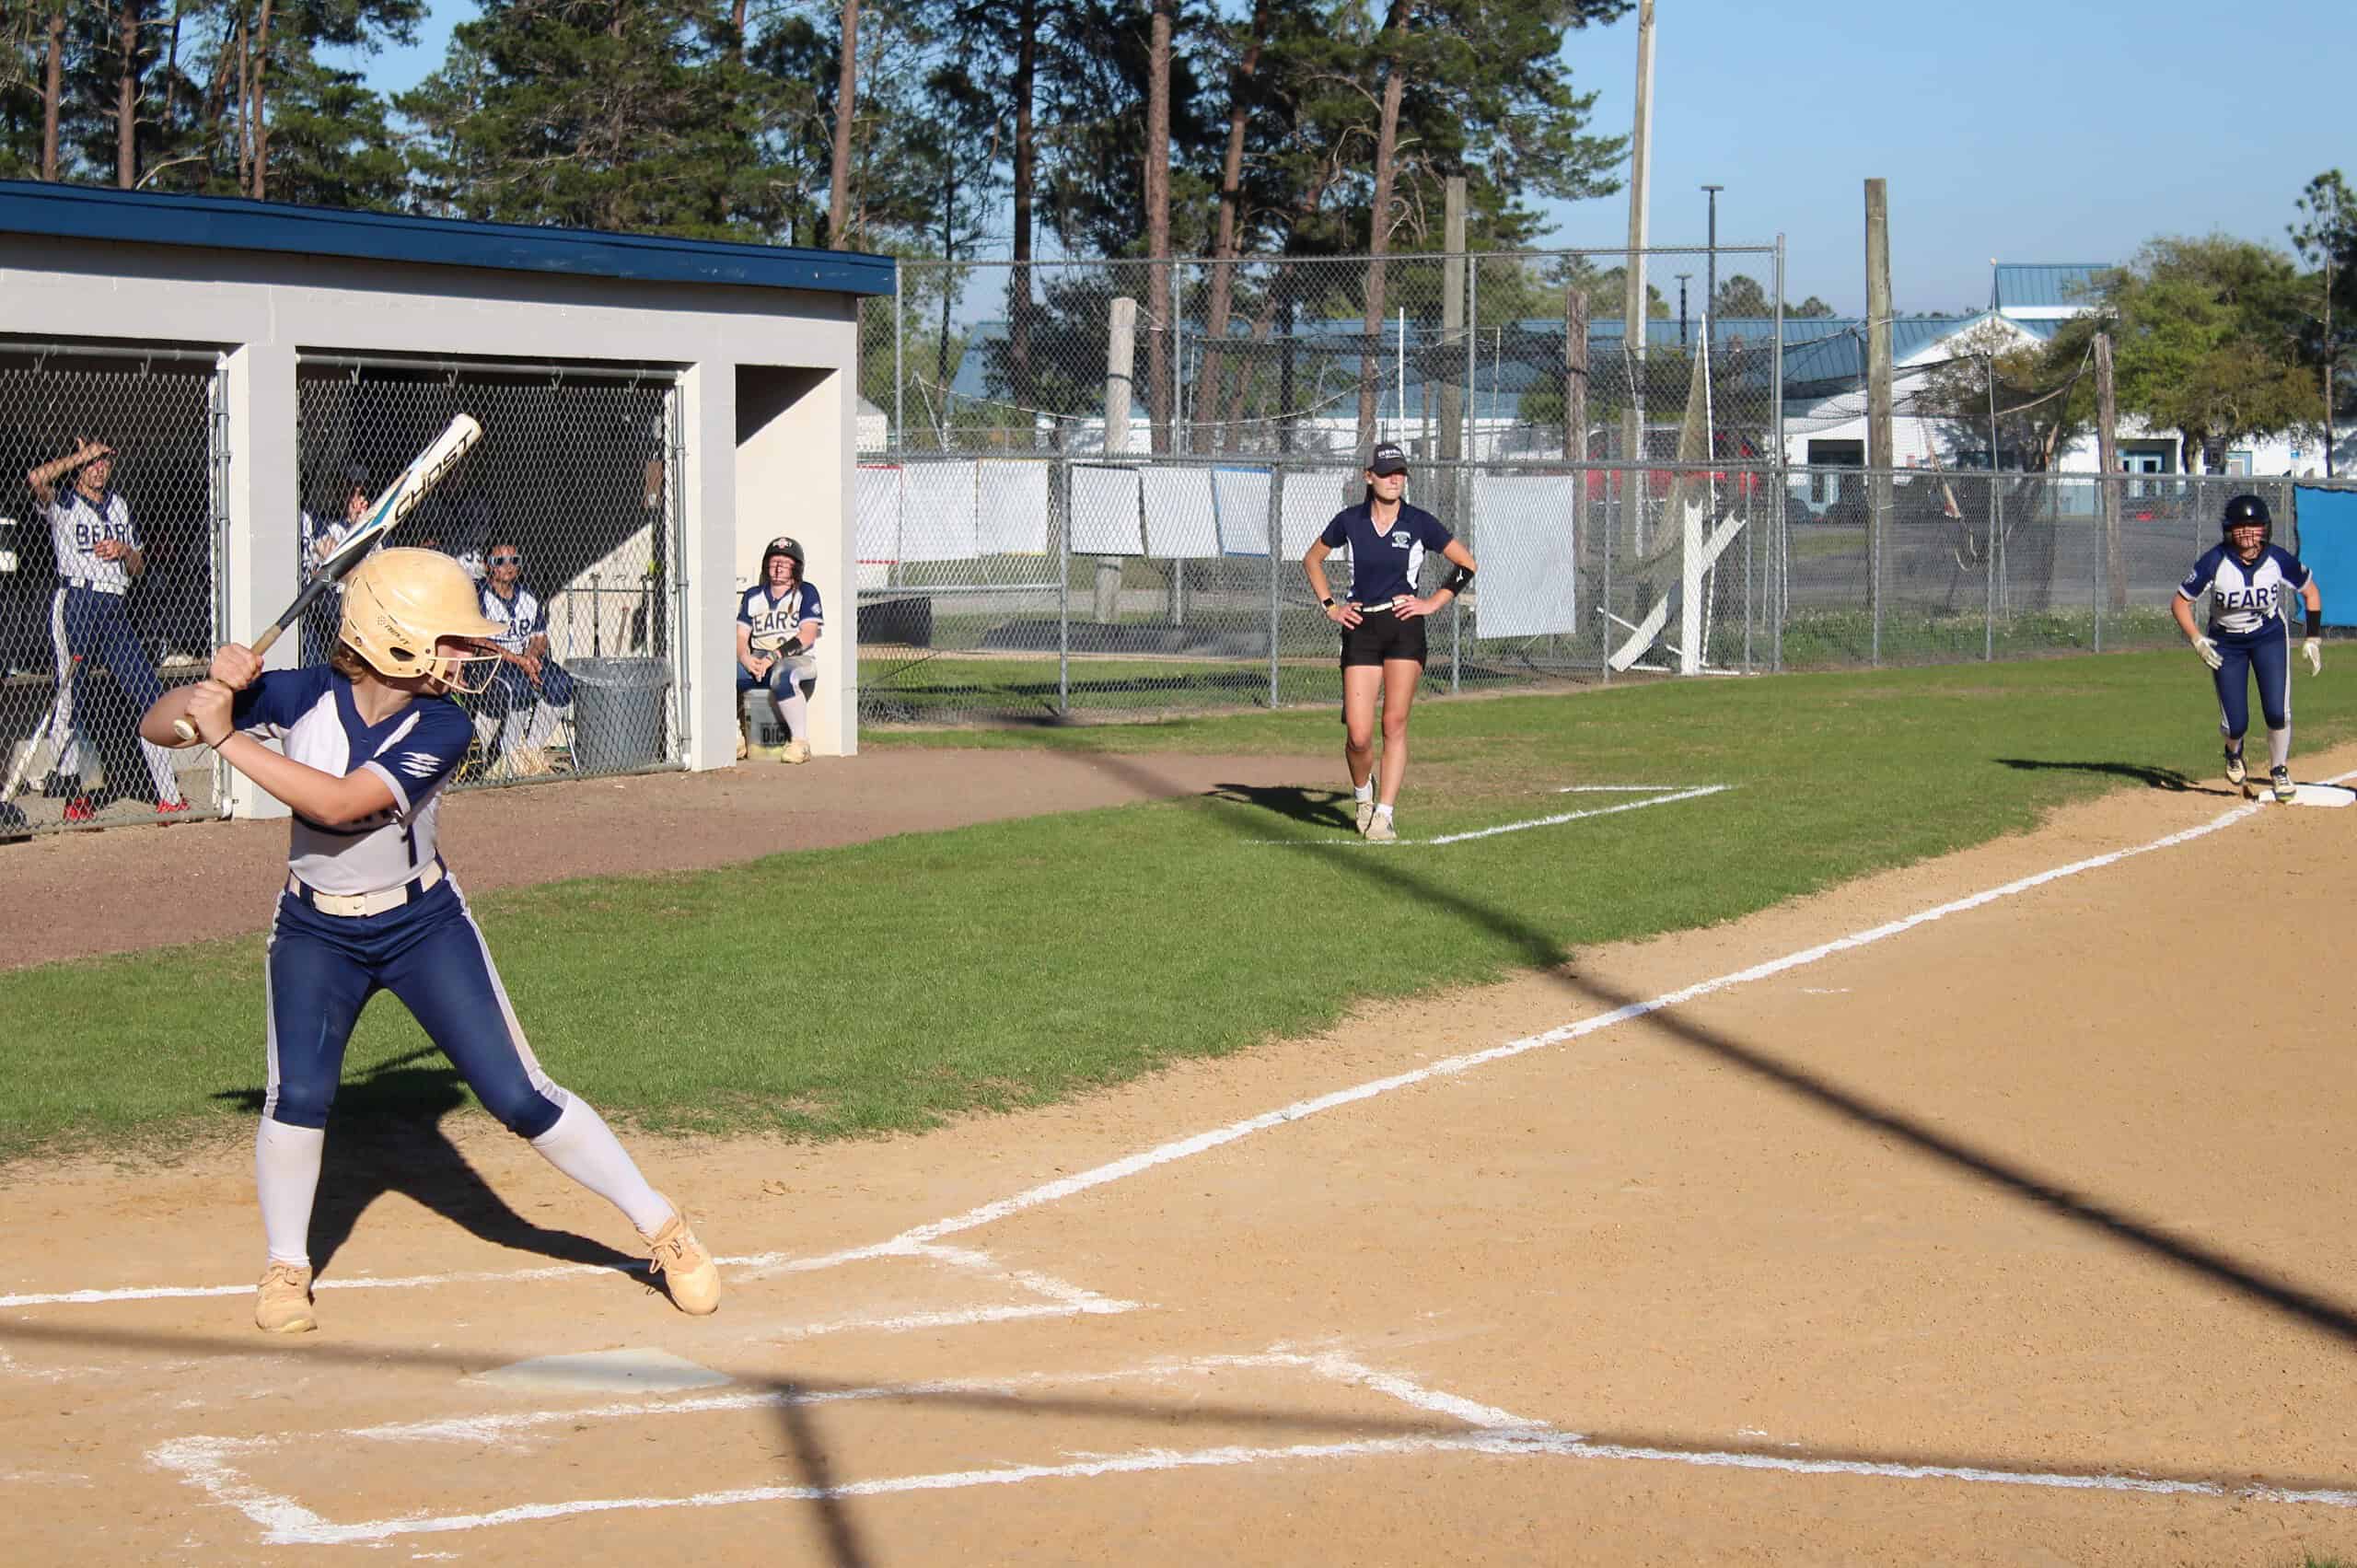 Central Freshman Ayva Frechette, 1, readies to hit a ball at the plate with a runner on third during a softball game between Weeki Wachee and Central. [Photo by Austyn Szempruch]